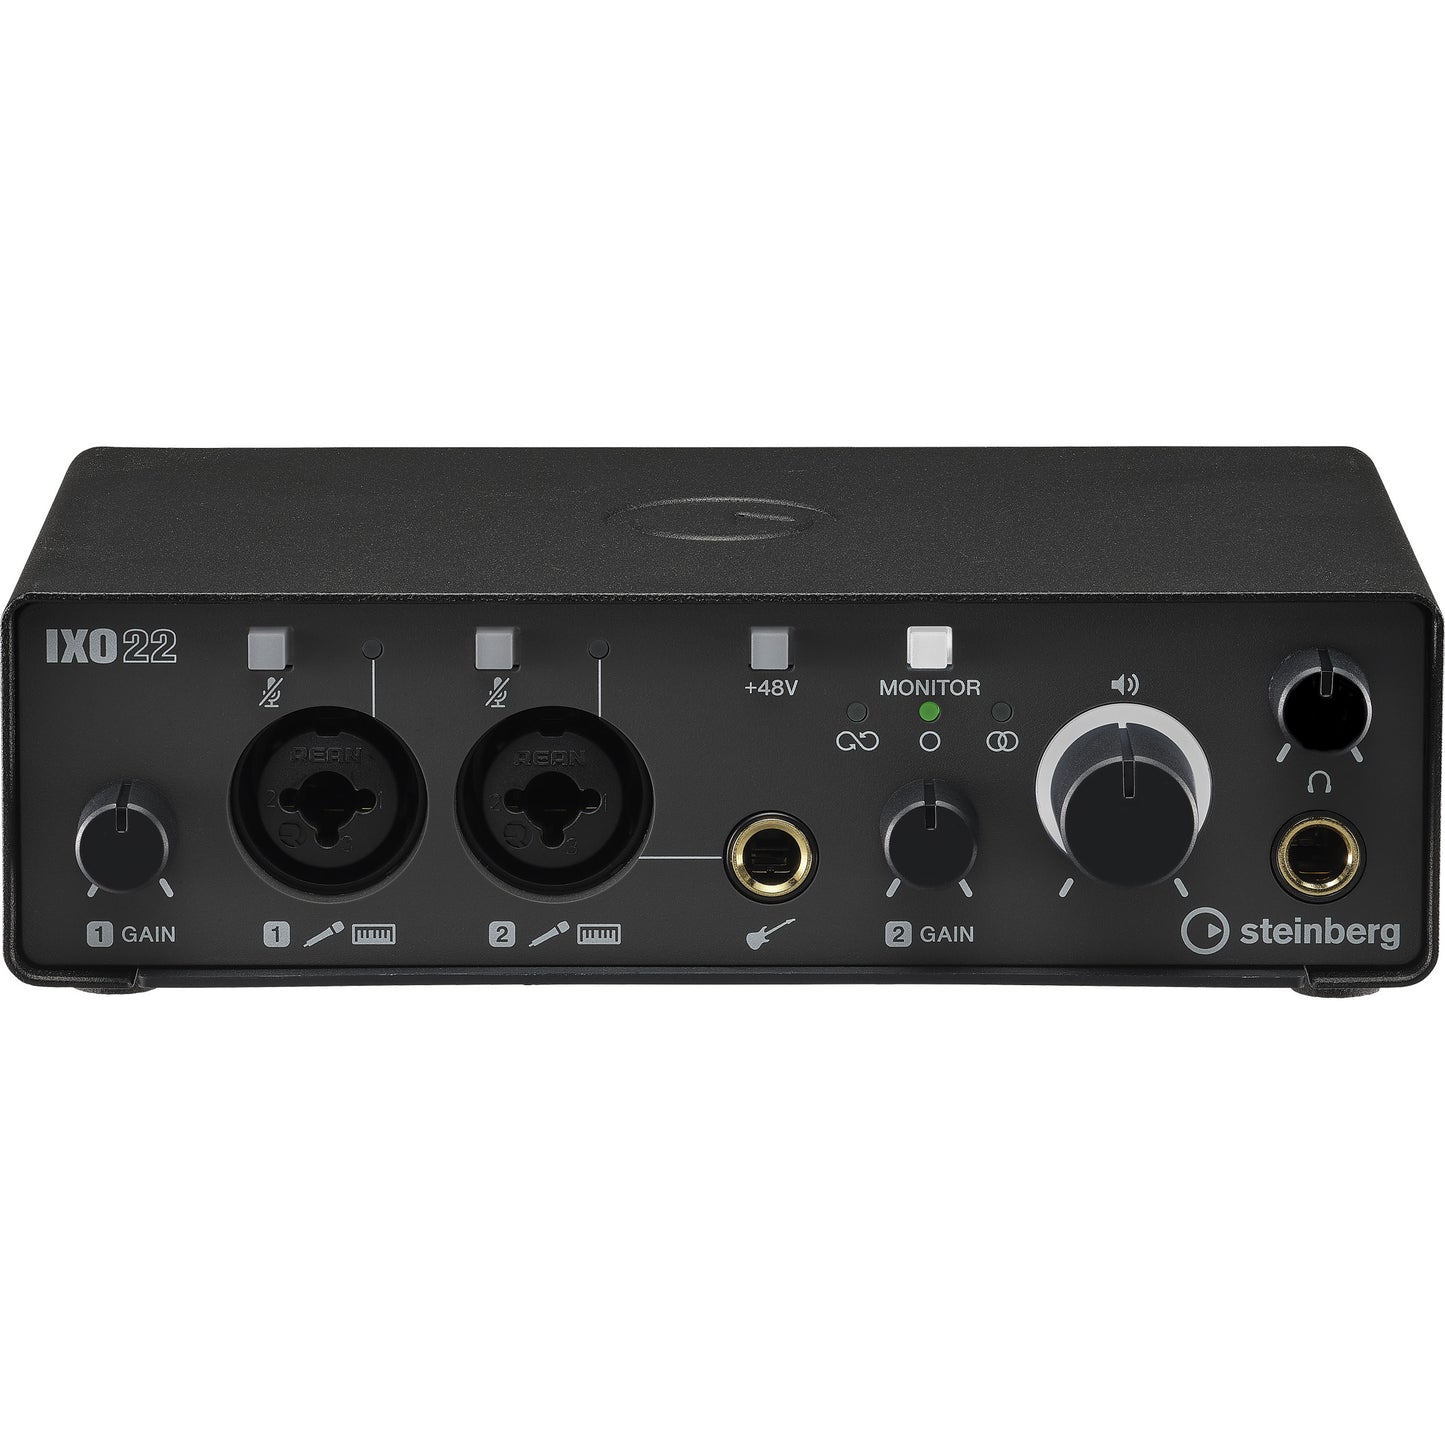 Steinberg IXO22 2 x 2 USB 2.0 Audio Interface with Two Mic Preamps - Black